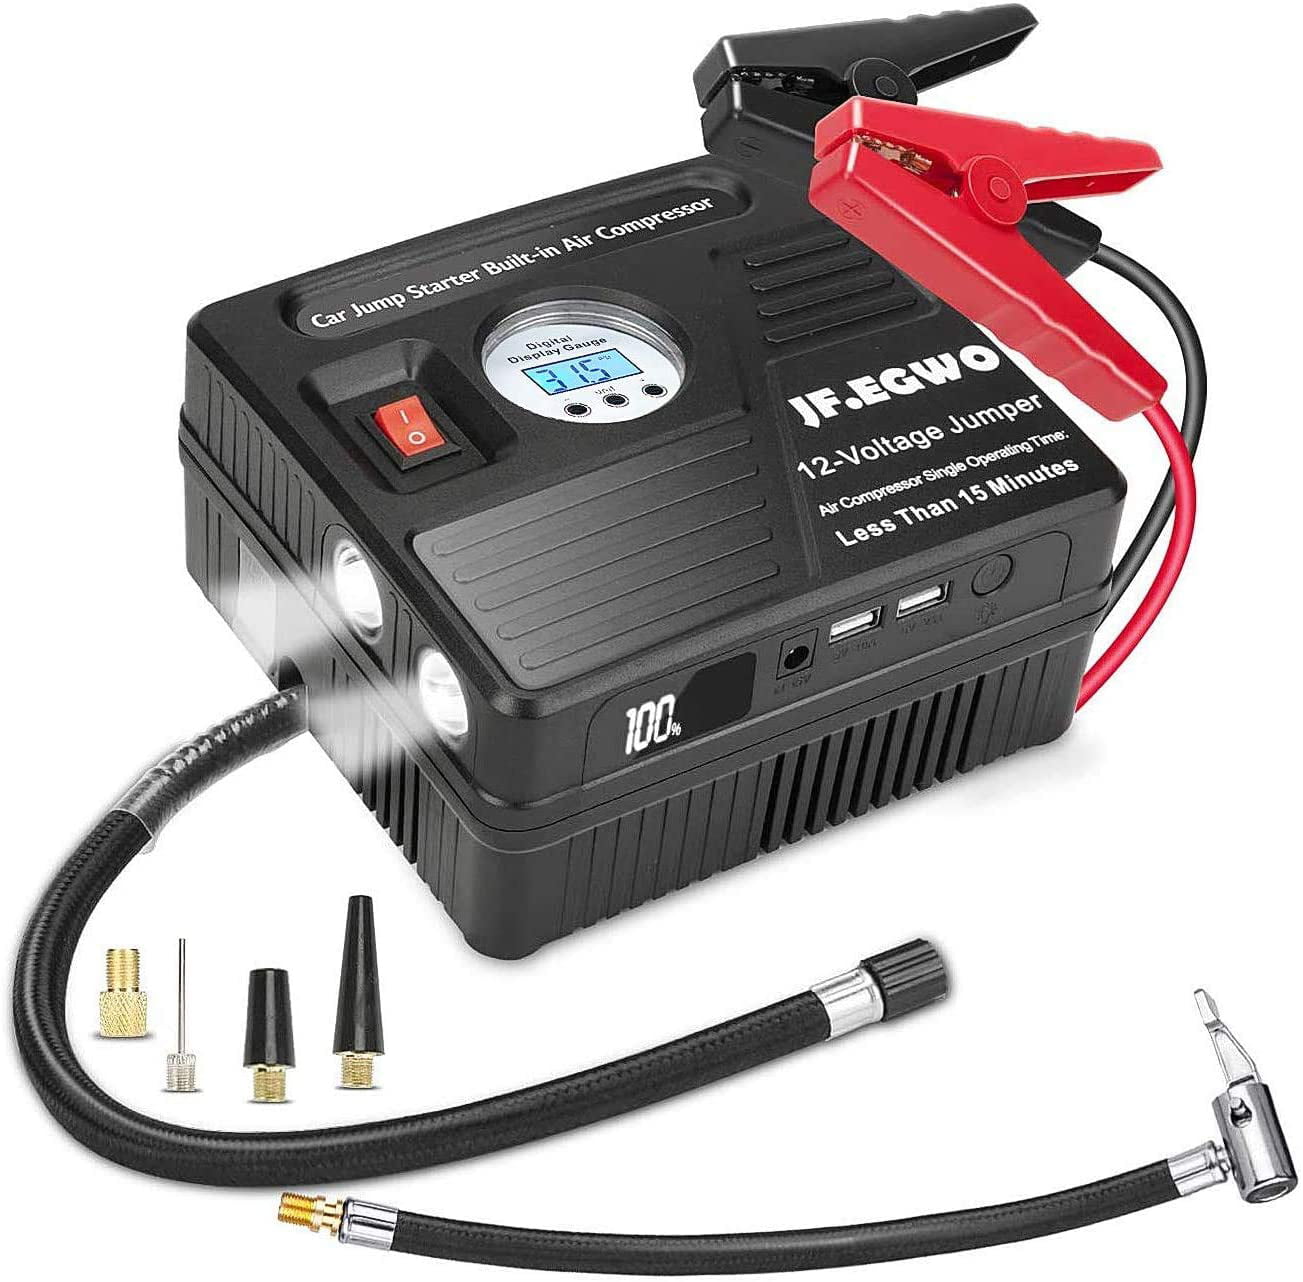 150PSI Tire Inflator with Digital Screen Pressure Gauge 3000Amp Car Jump Starter with Air Compressor 9.0L Gas/ 8.5LDiesel Engine 24000mAh 12V Auto Battery Booster 2 USB Port 2 Light 